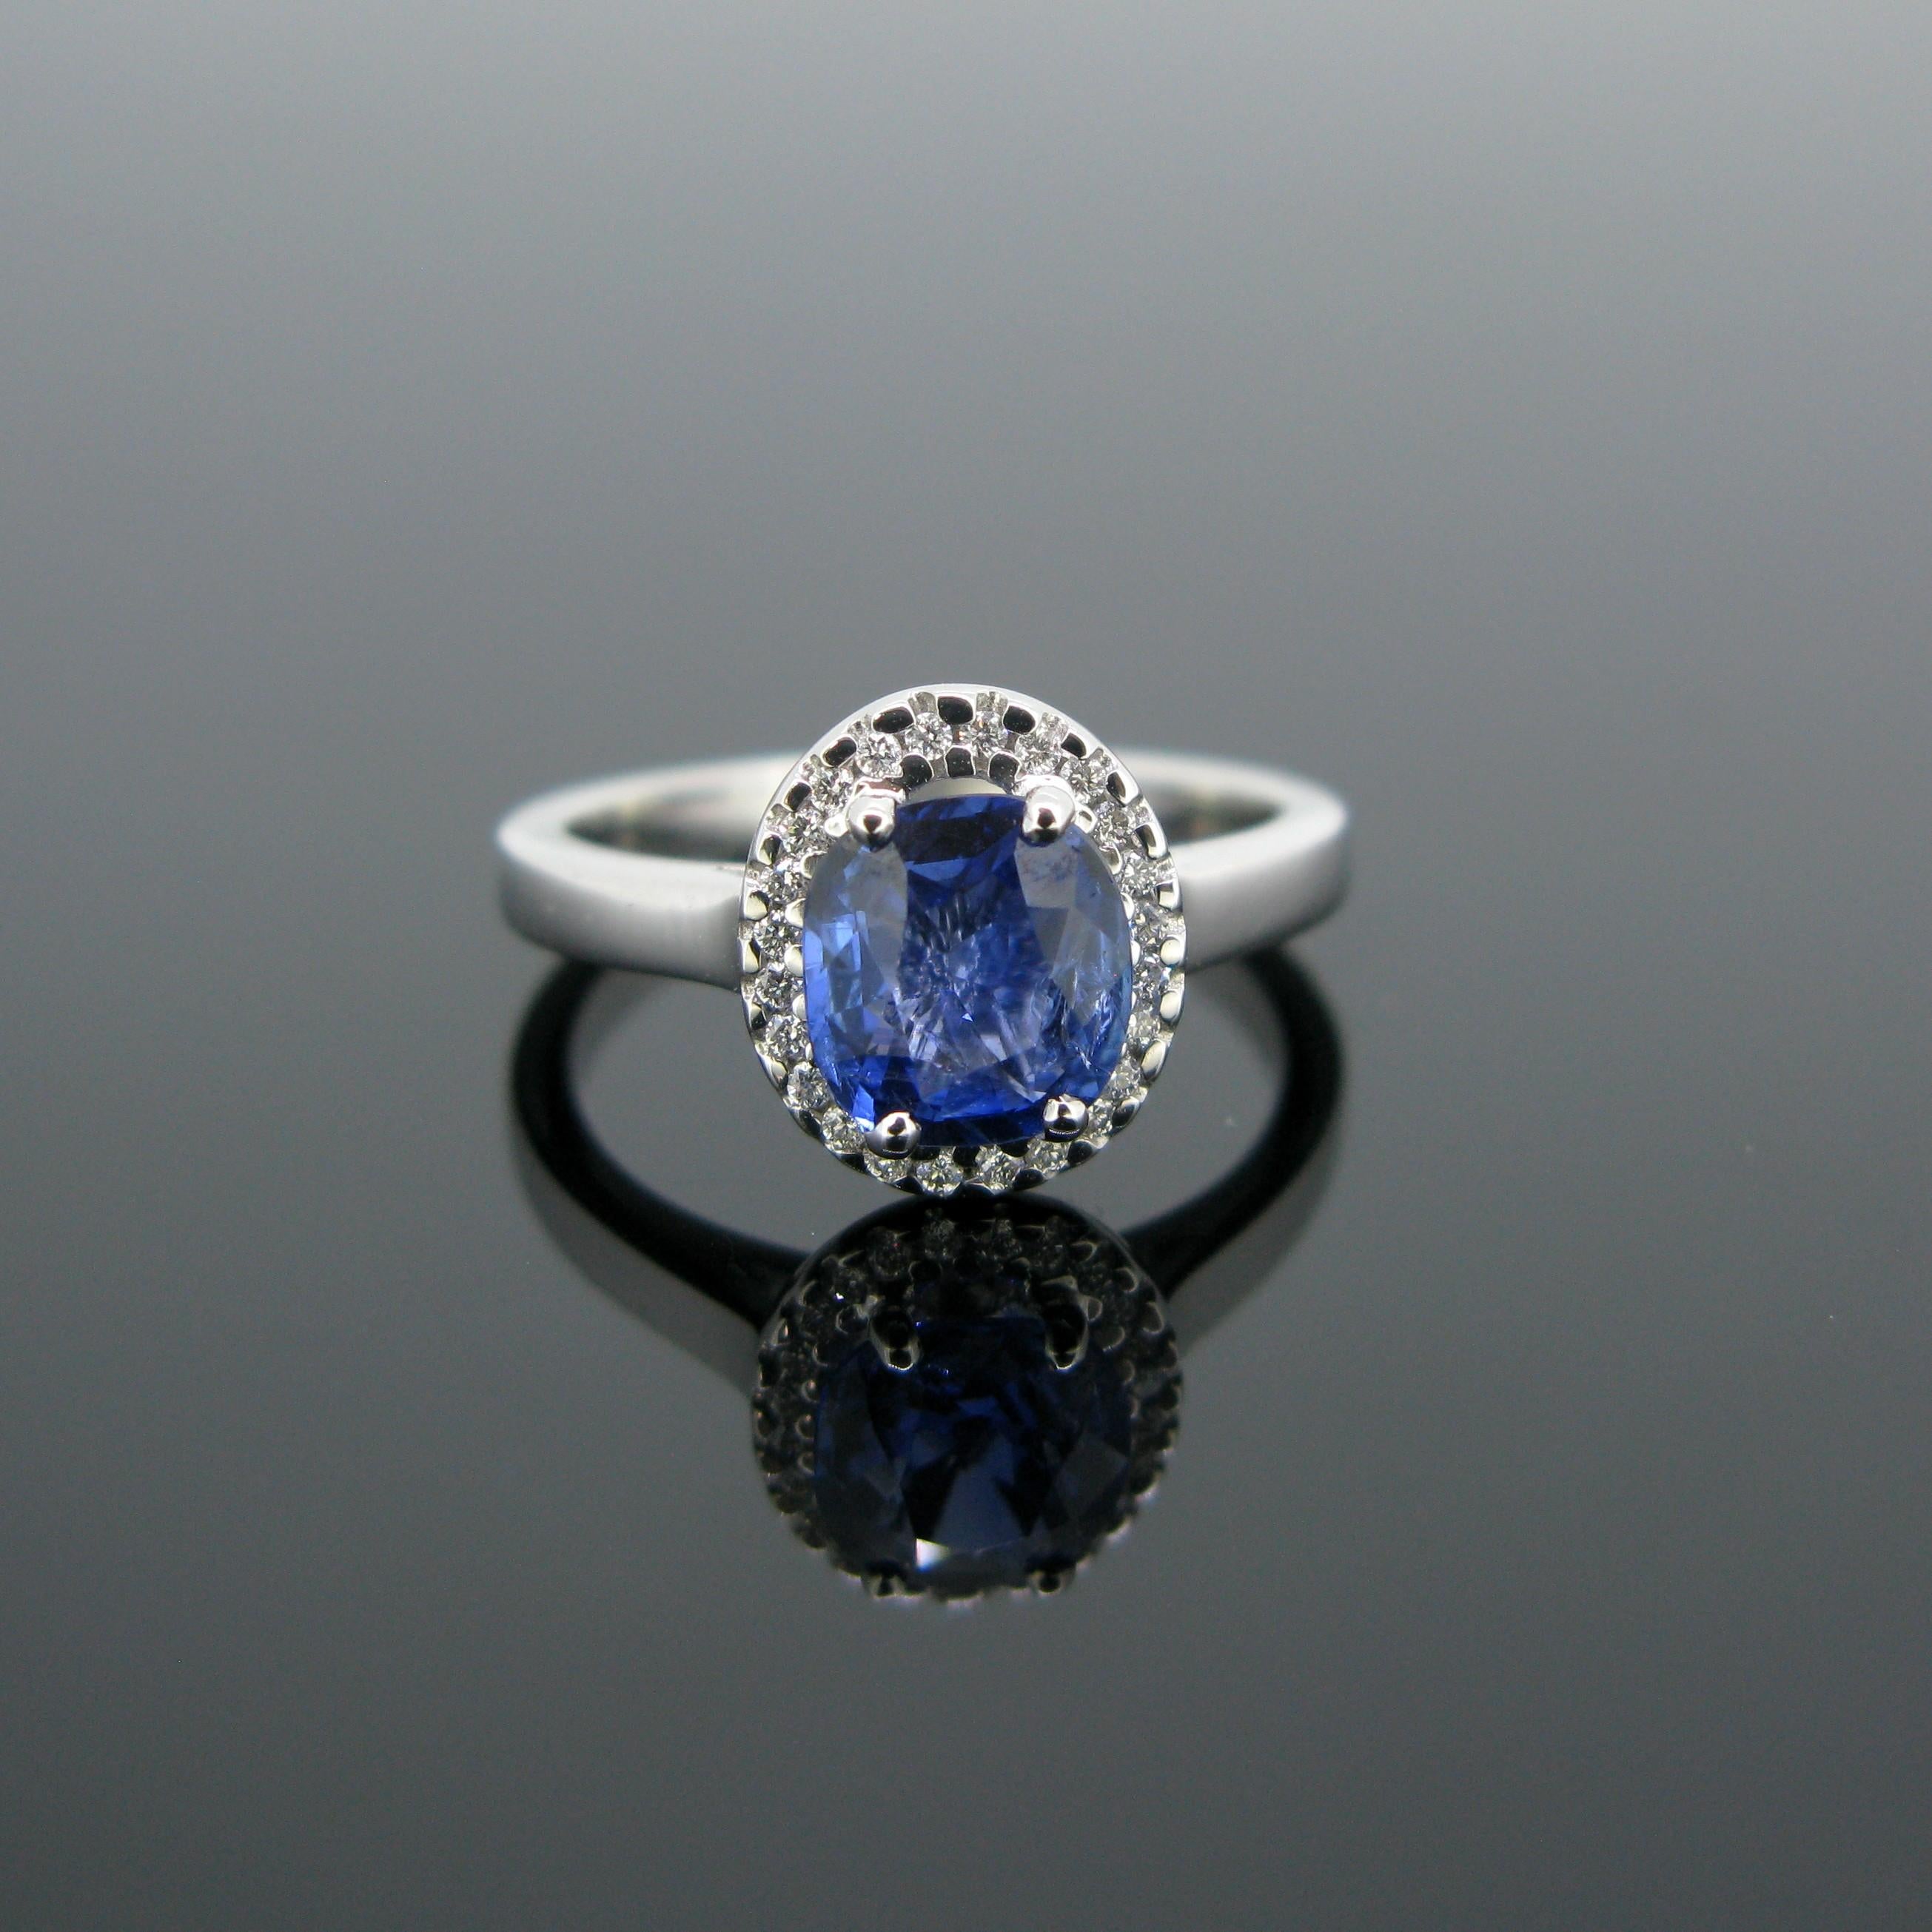 This modern ring is made in 18k white gold and features a cushion cut Ceylon sapphire with a weight of 1.44ct and no indication of heating. It is surrounded by 24 small diamonds with an approximate total carat weight of 0.20ct. It is a beautiful